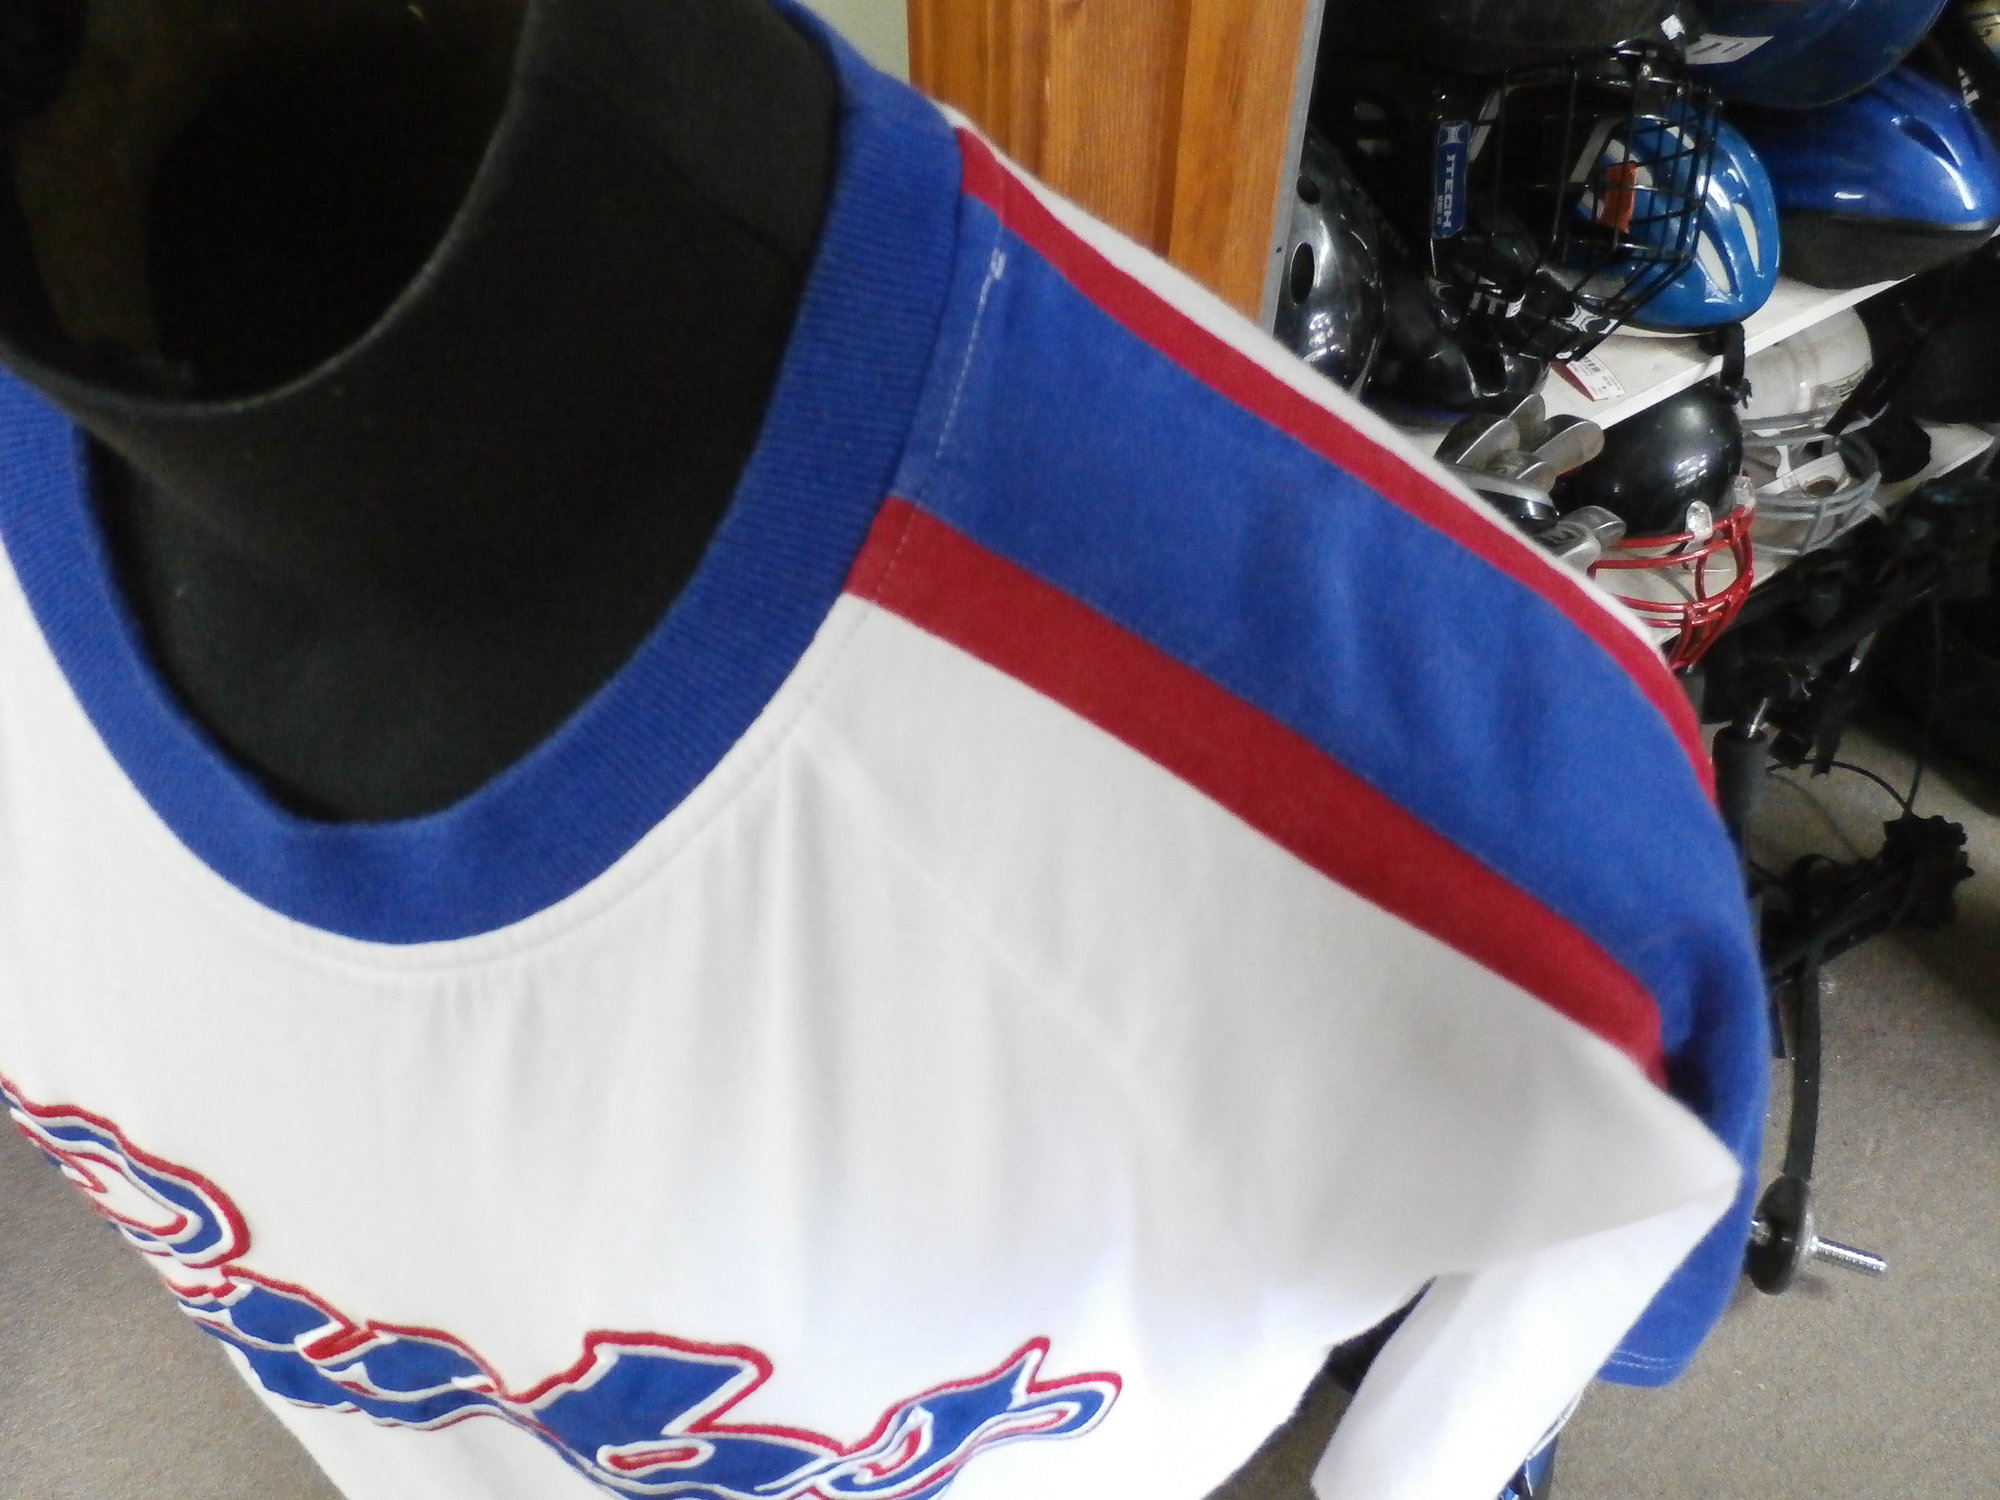 Chicago Cubs Shirt  Recycled ActiveWear ~ FREE SHIPPING USA ONLY~